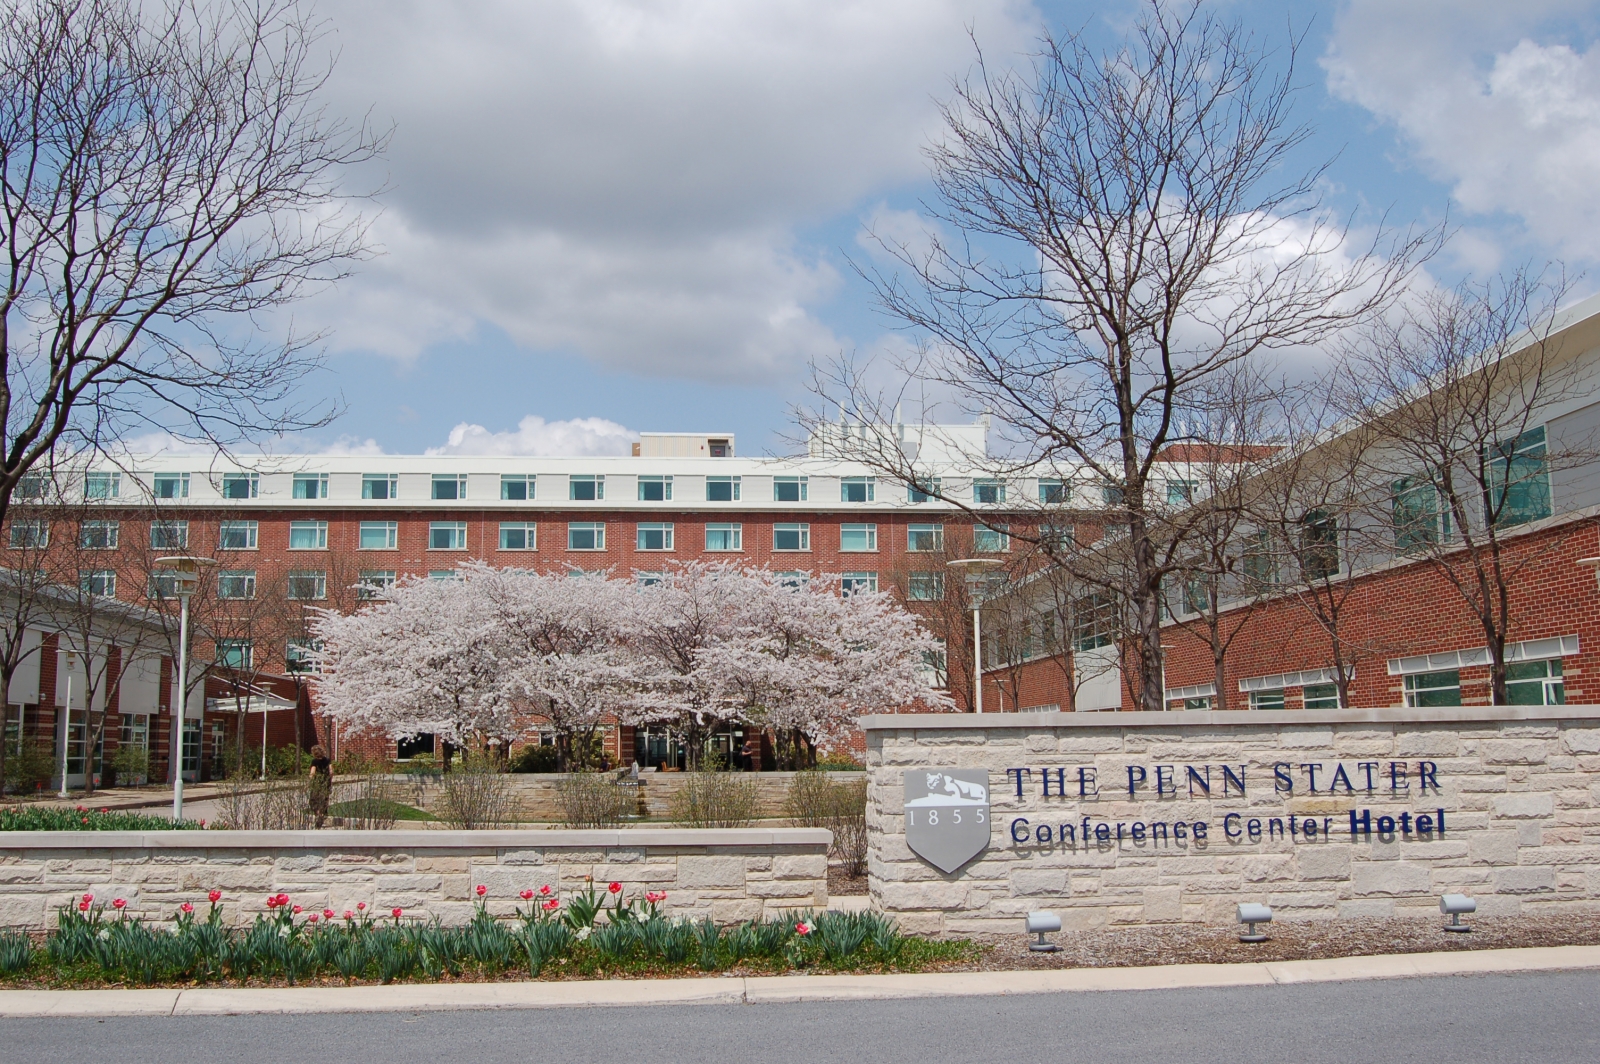 Penn Stater Hotel and Conference Center